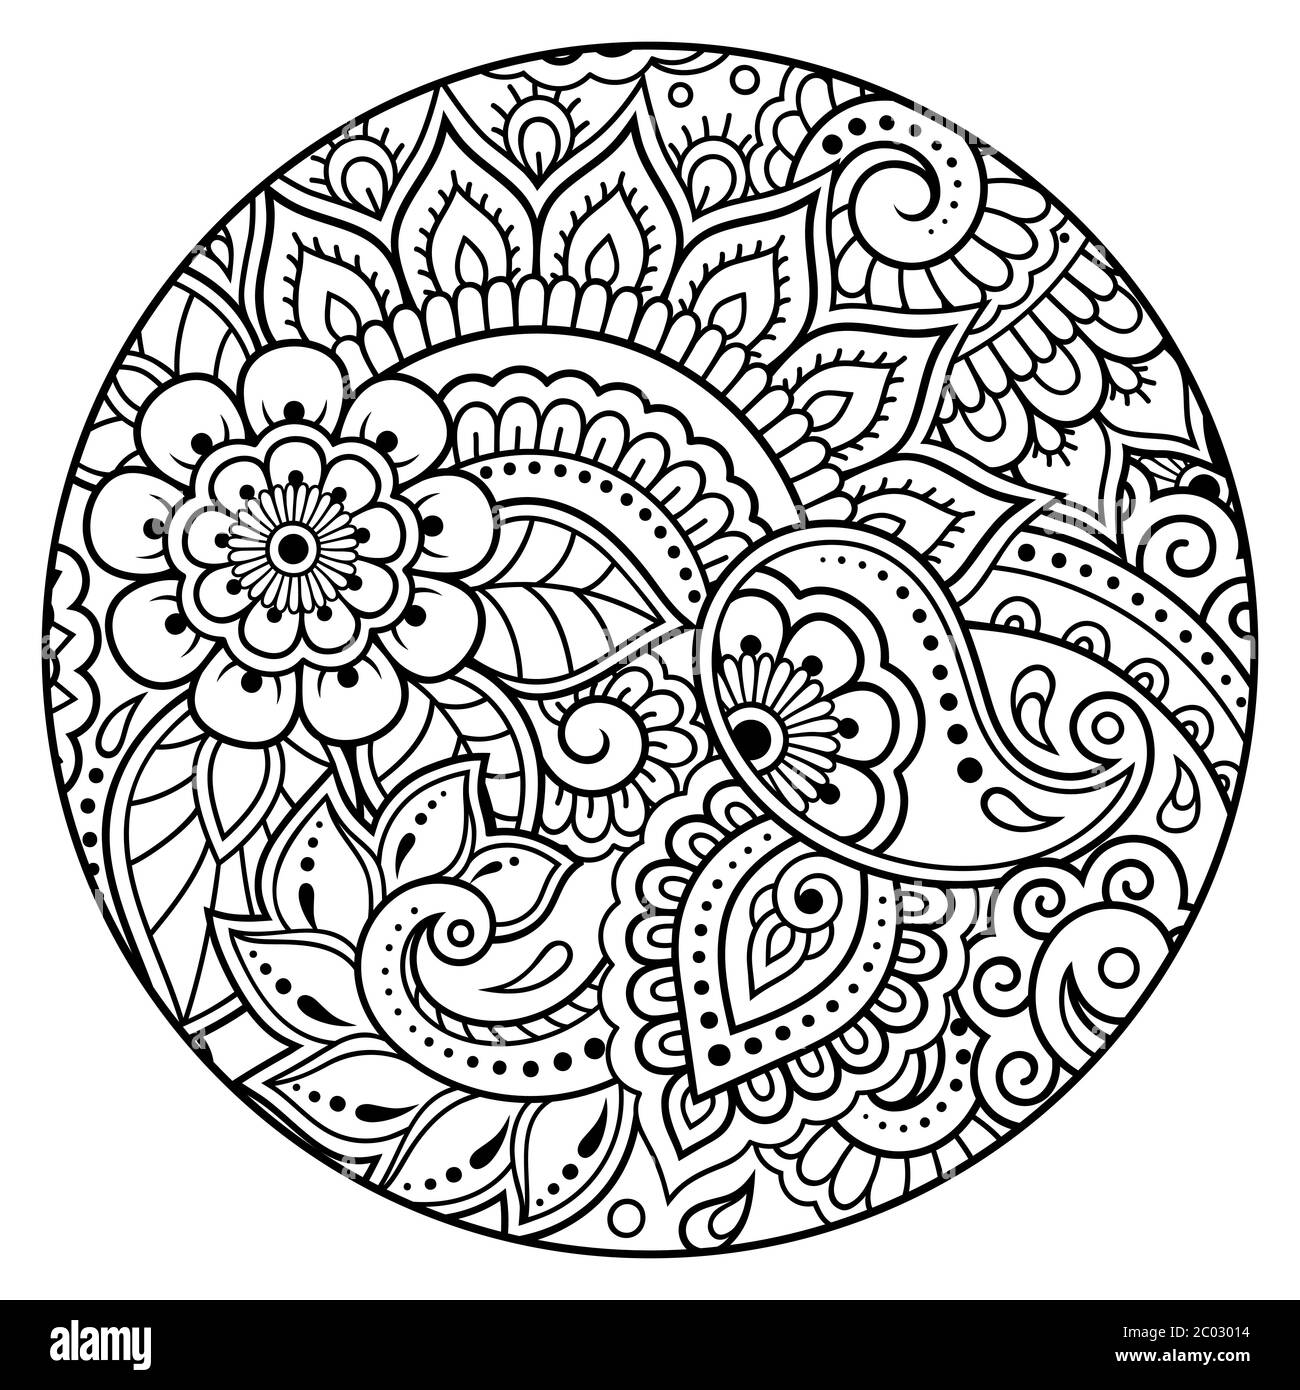 Outline Floral Pattern For Coloring Book Page Antistress For Adults And  Children Doodle Ornament In Black And White Hand Draw Vector Illustration  Stock Illustration - Download Image Now - iStock